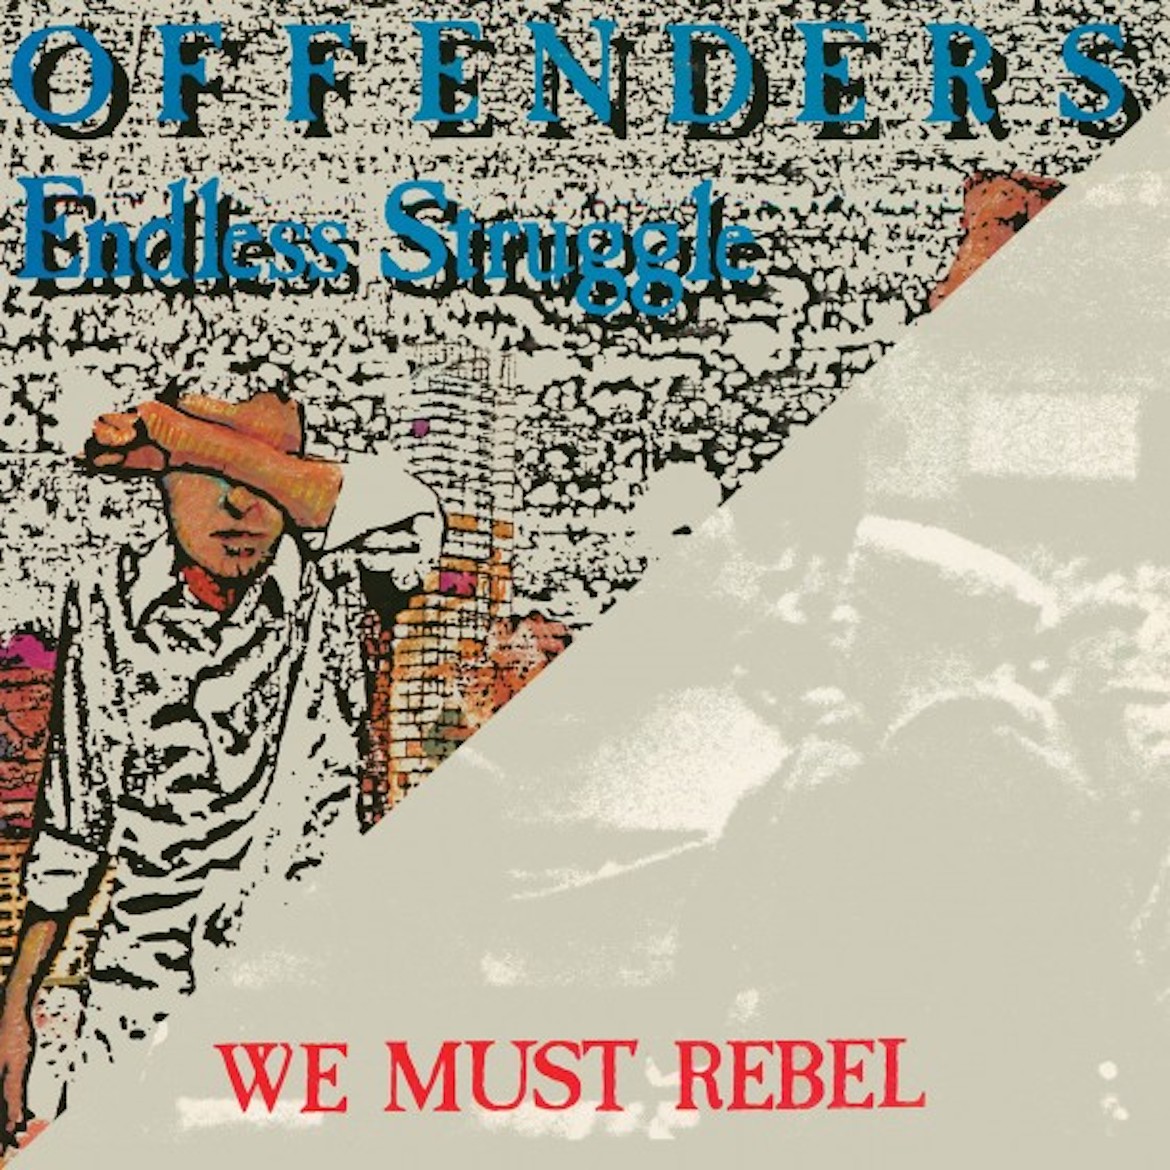 We Must Rebel album cover by Offender